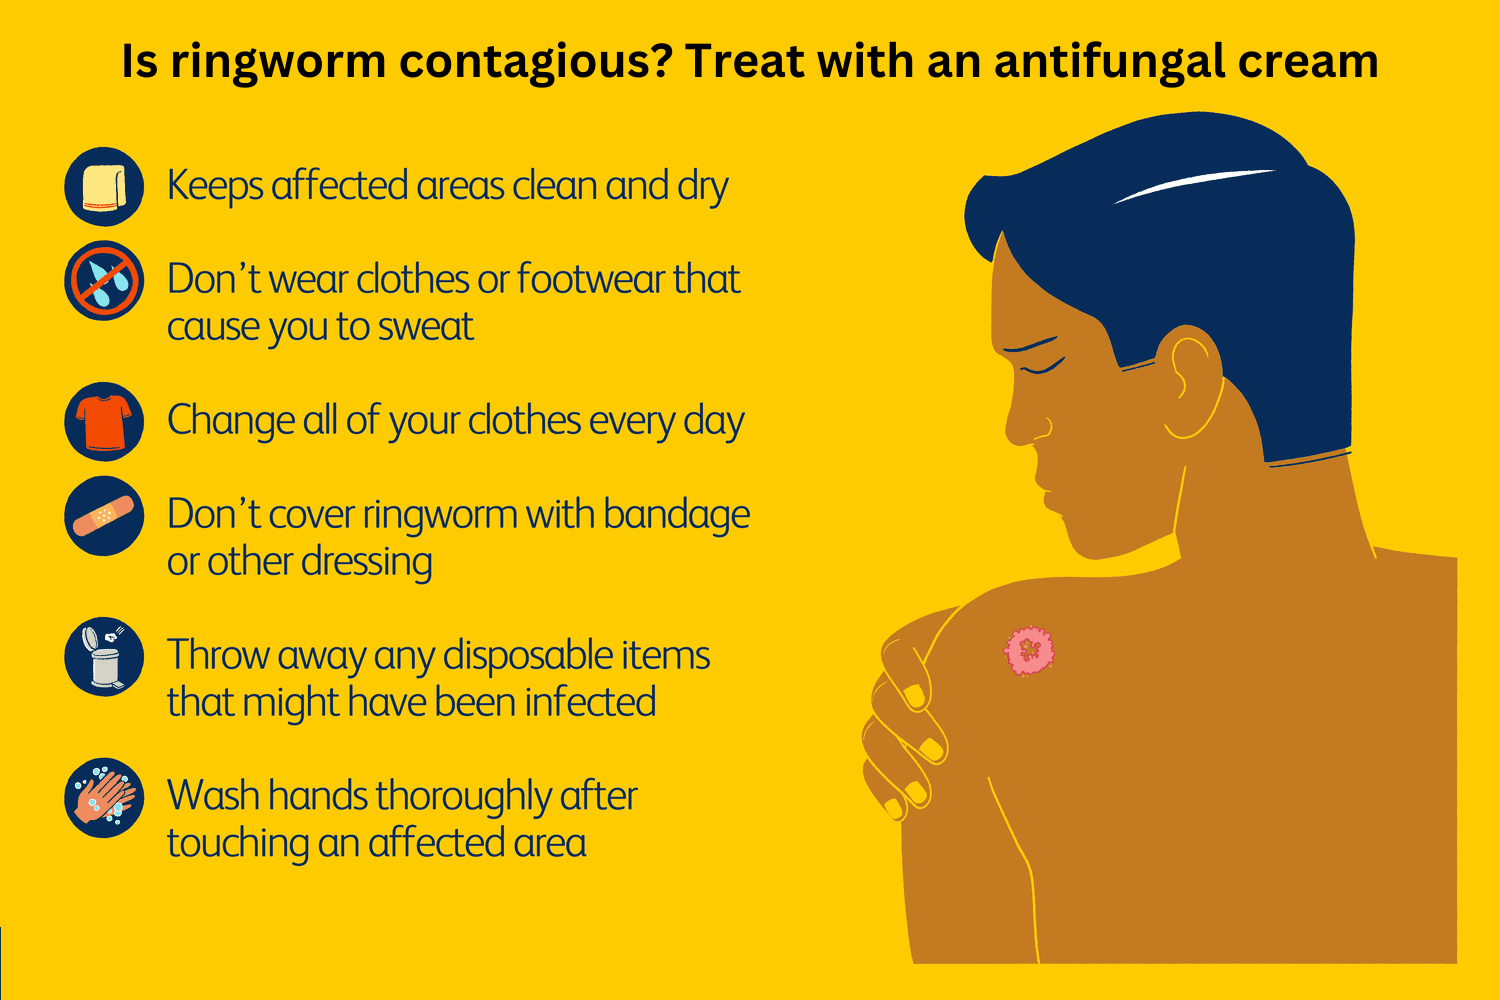 Is ringworm contagious? Treat with an antifungal cream